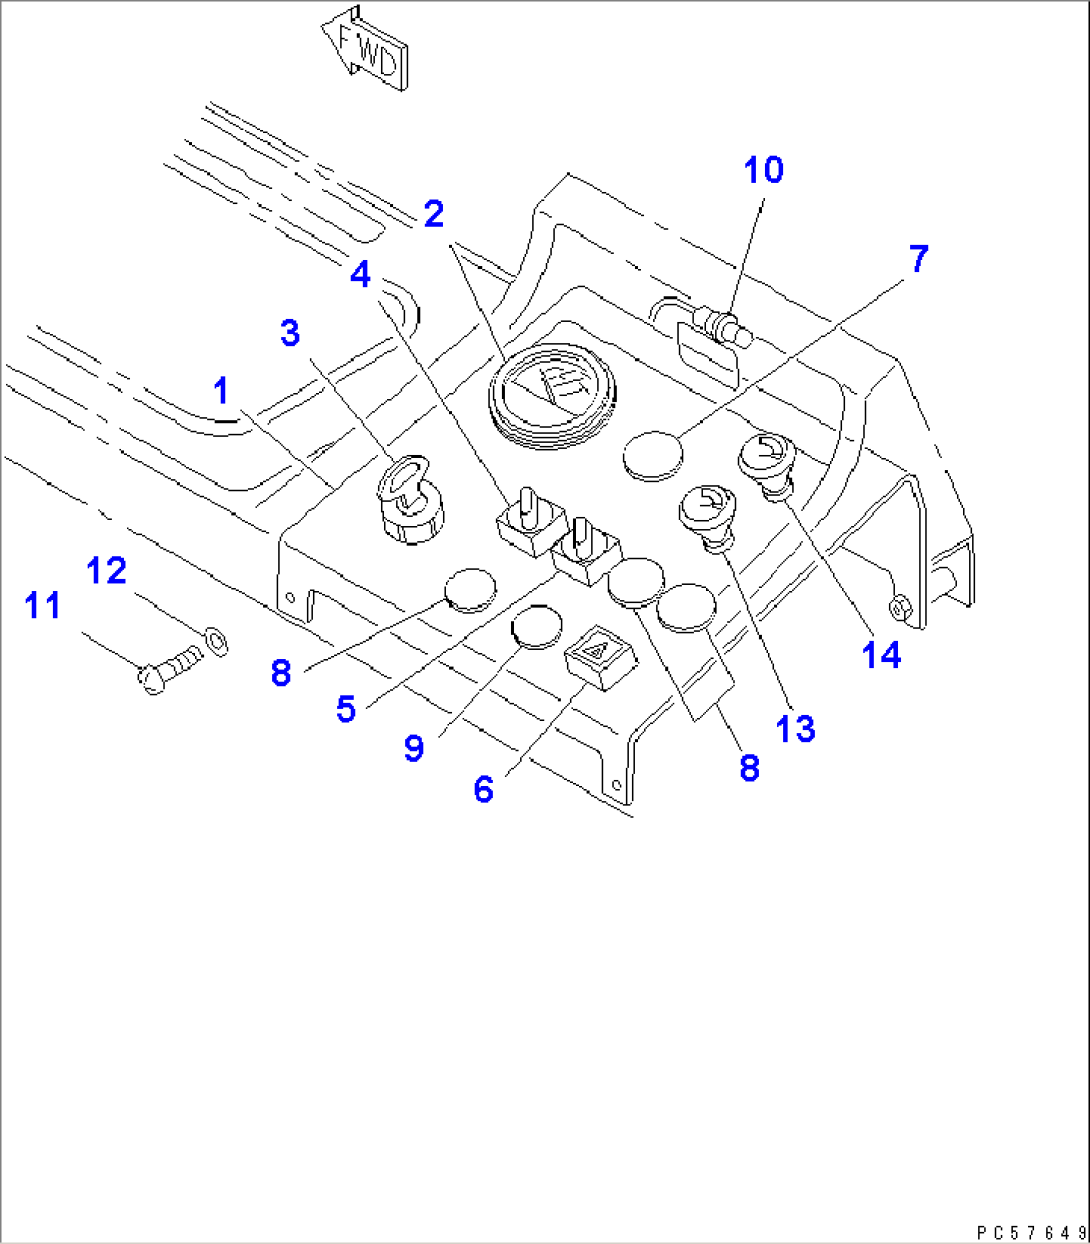 INSTRUMENT PANEL (WITH WIPER)